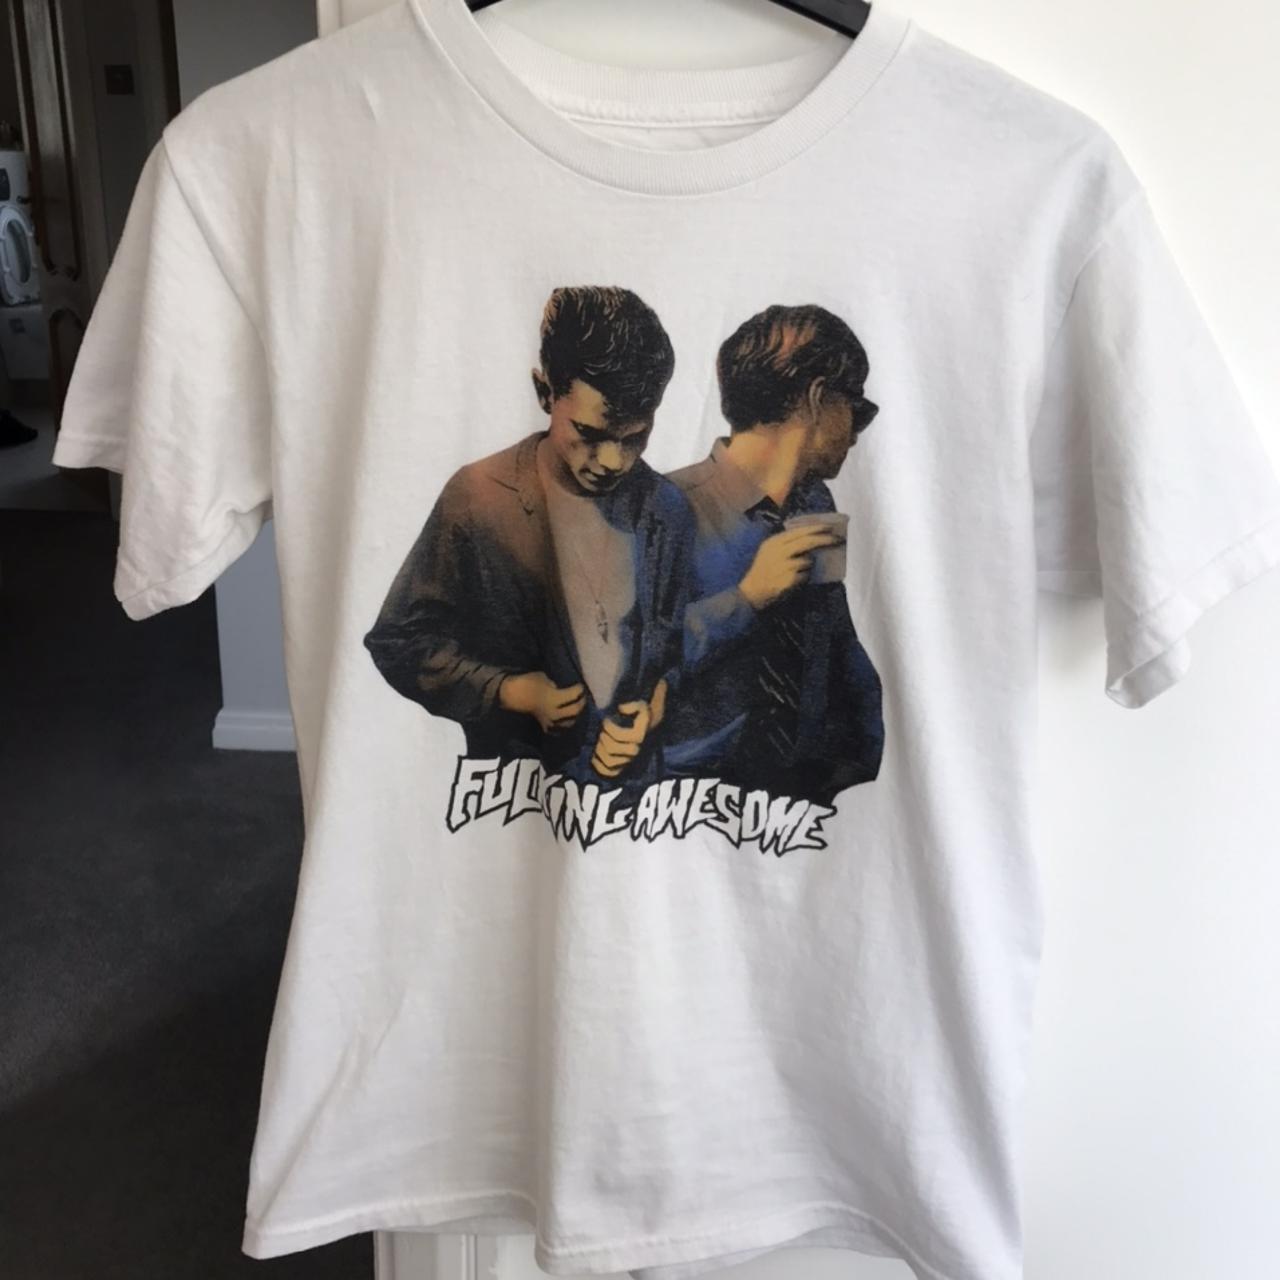 trådløs tørst Hick Fucking Awesome brothers t-shirt in size S... - Depop